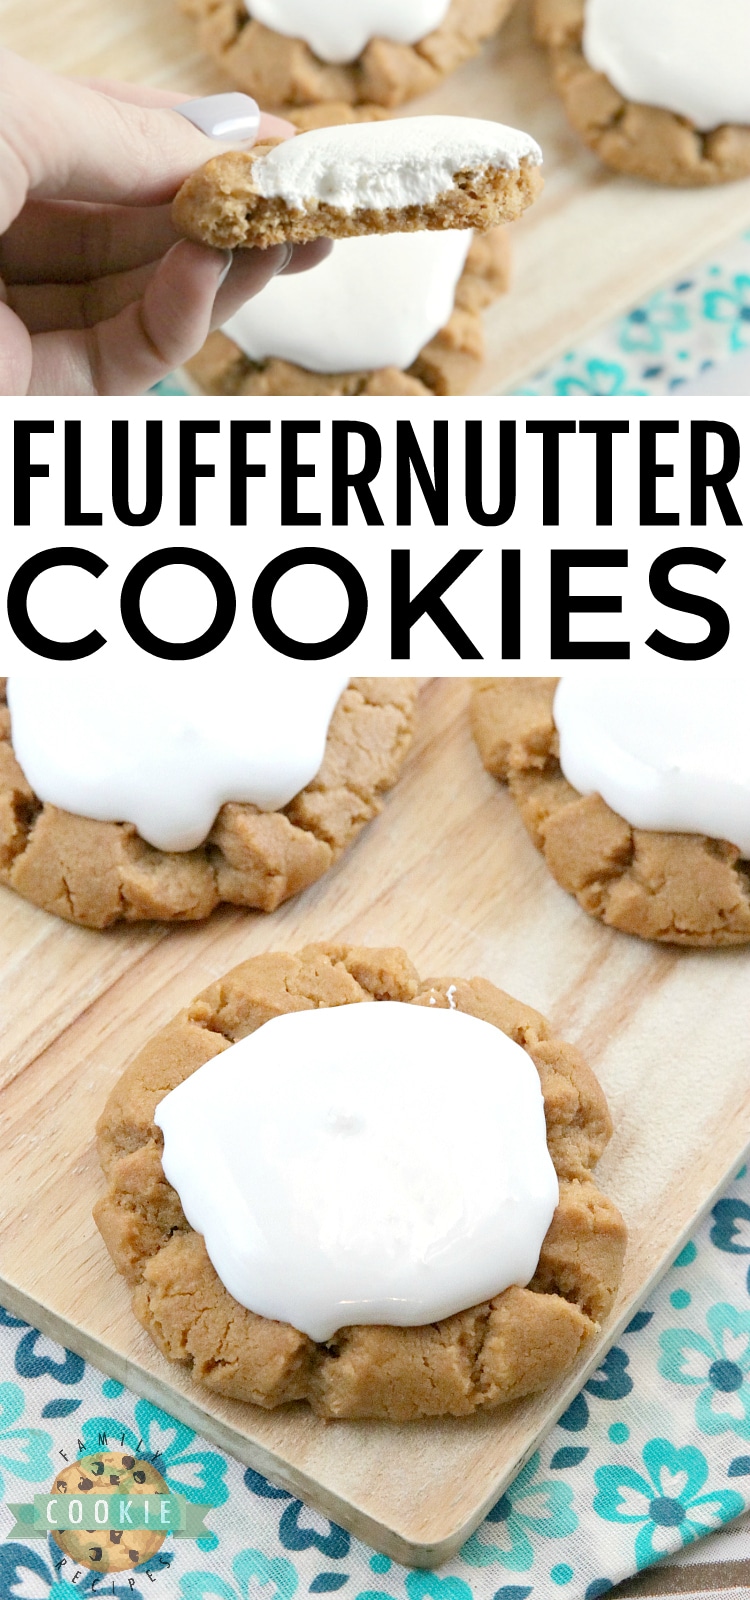 Fluffernutter Cookies take a traditional peanut butter cookie recipe to the next level by adding marshmallow fluff to the top! The peanut butter and marshmallow combination is absolutely amazing in this cookie recipe!